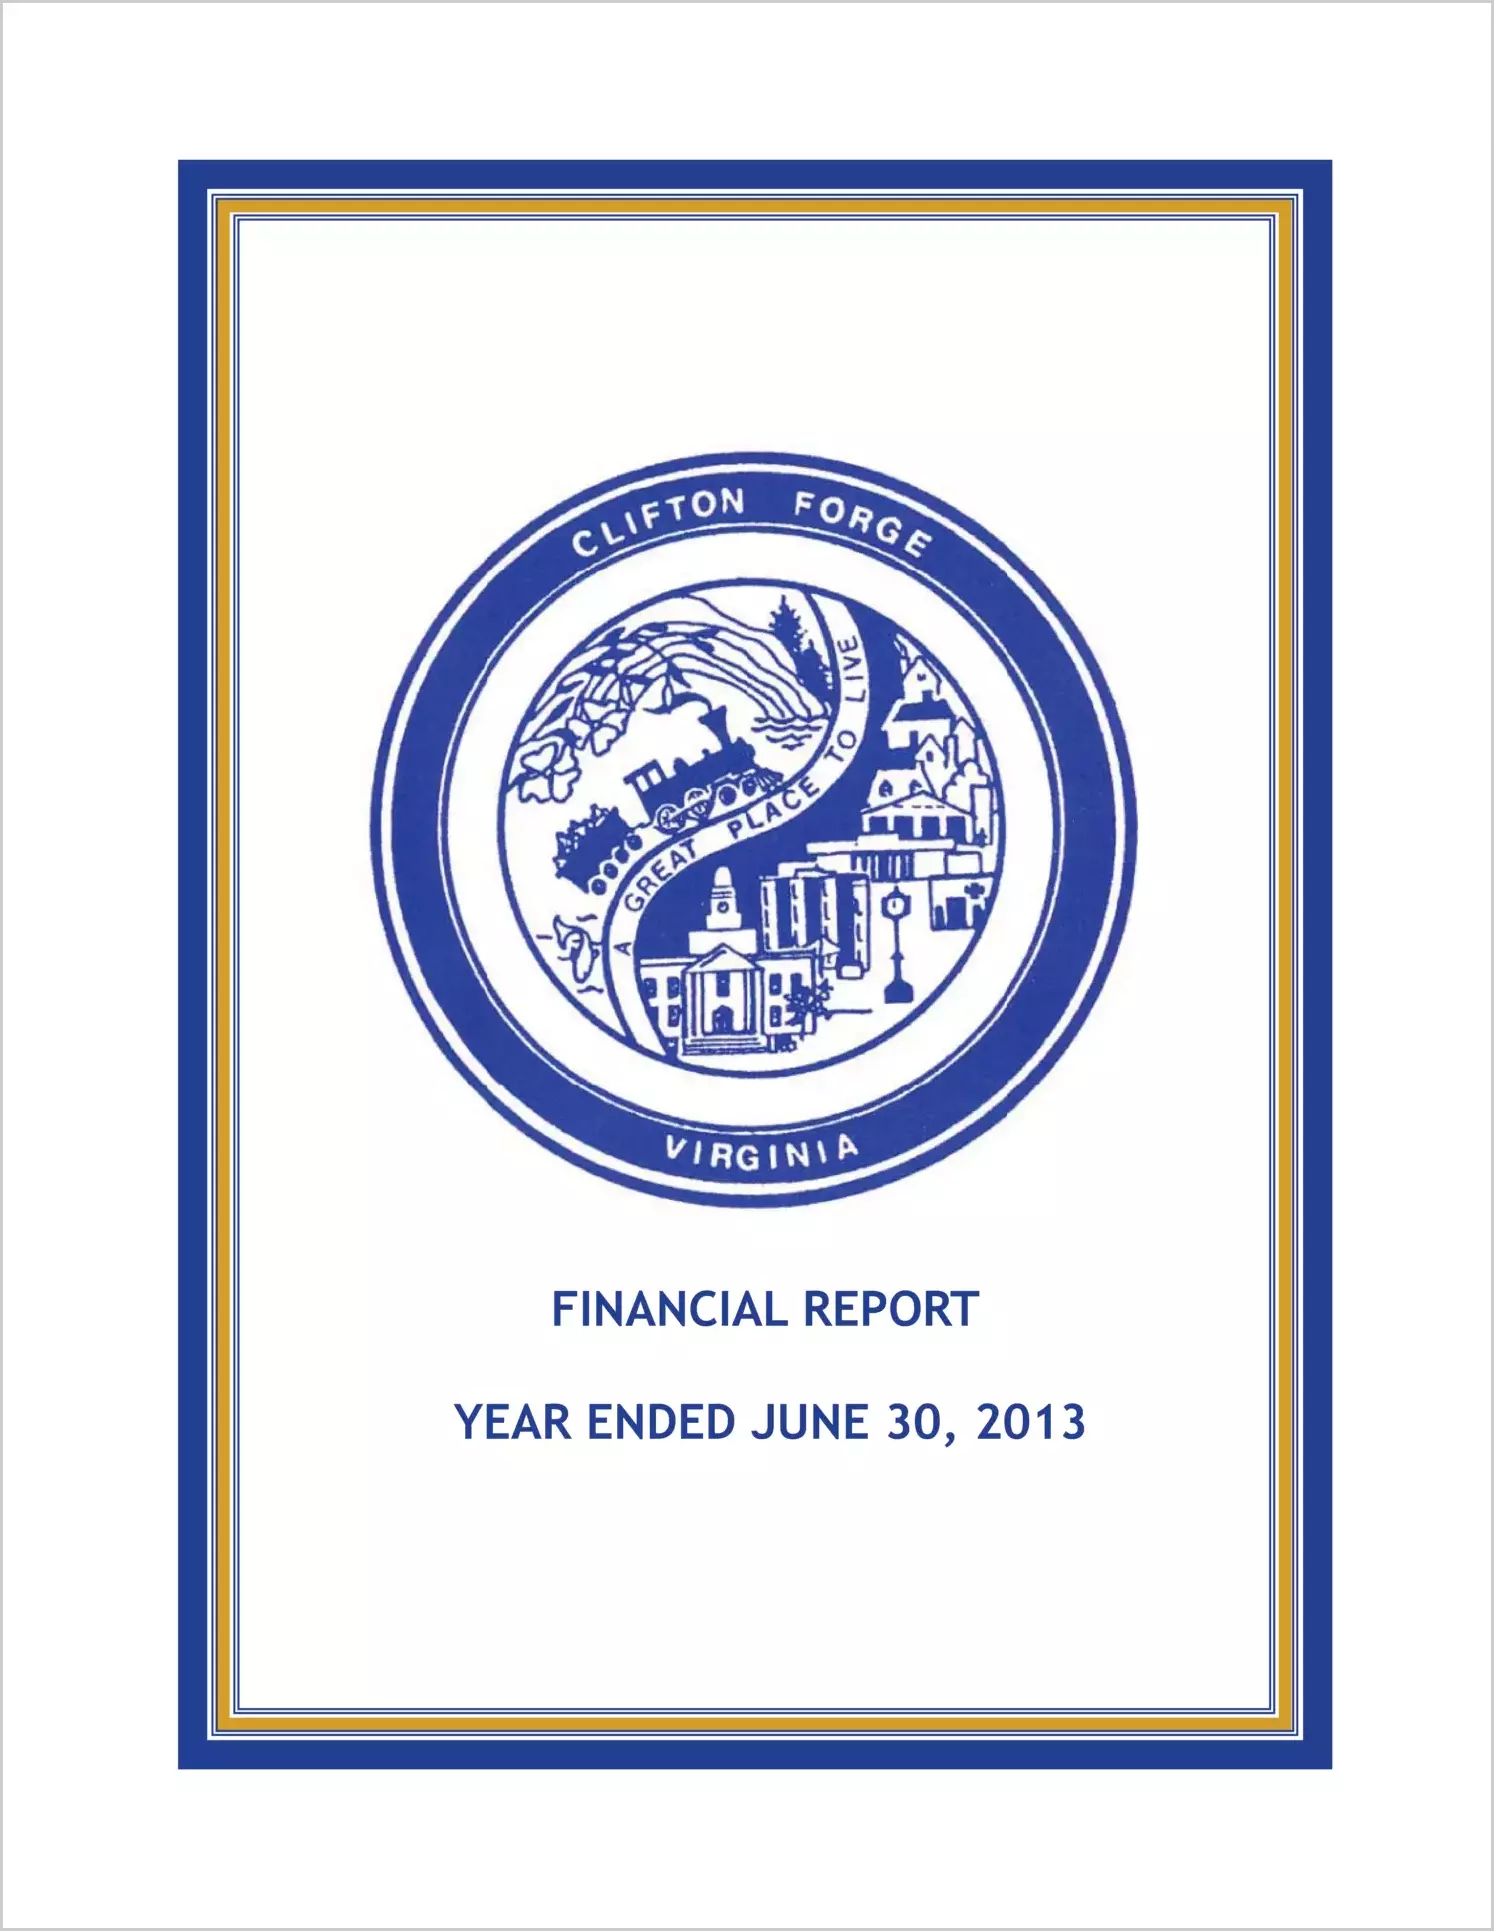 2013 Annual Financial Report for Town of Clifton Forge